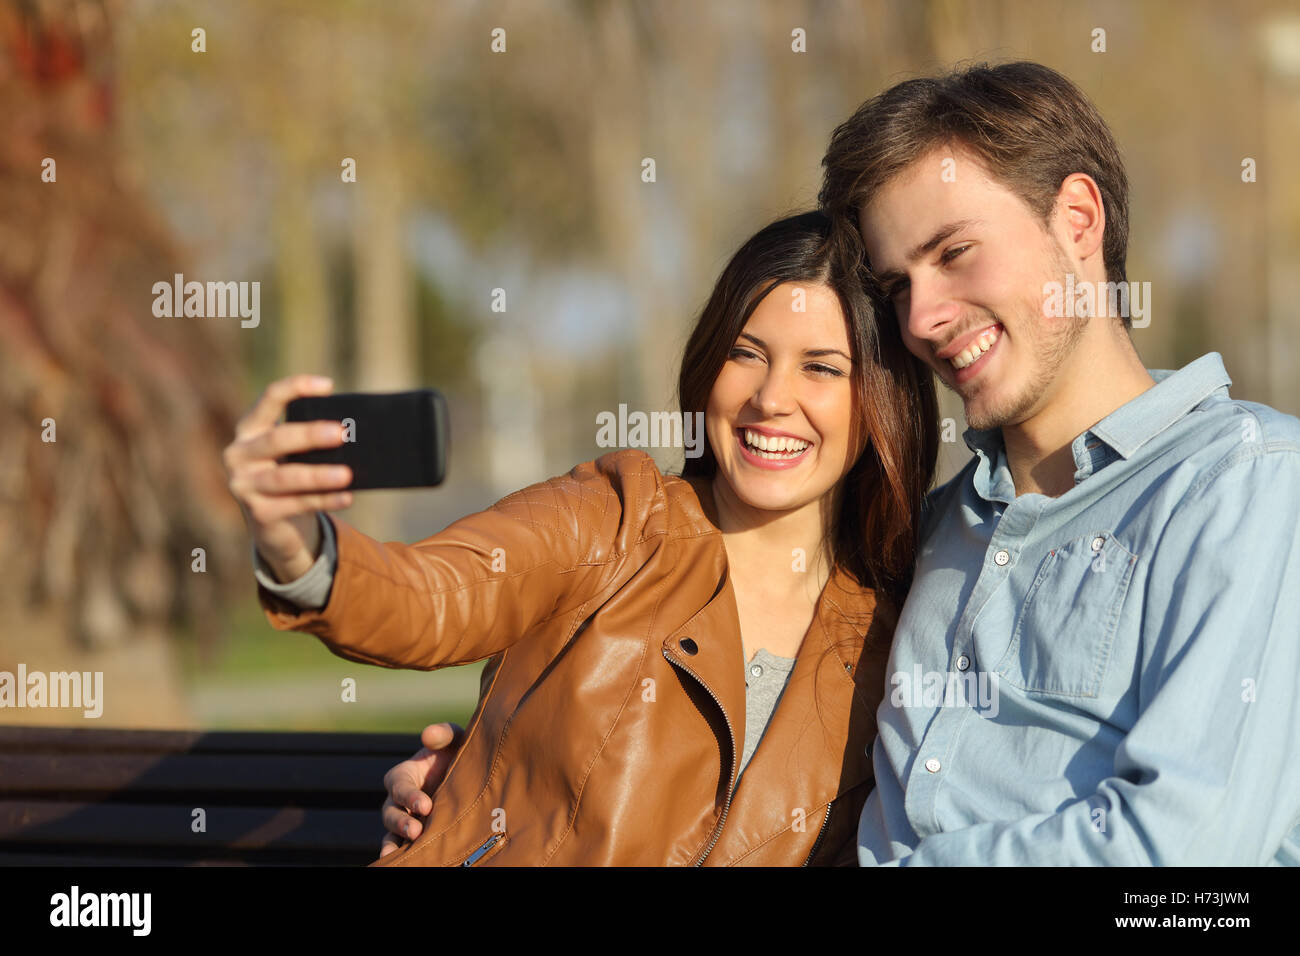 Couple taking selfie photo sitting in a bench Stock Photo